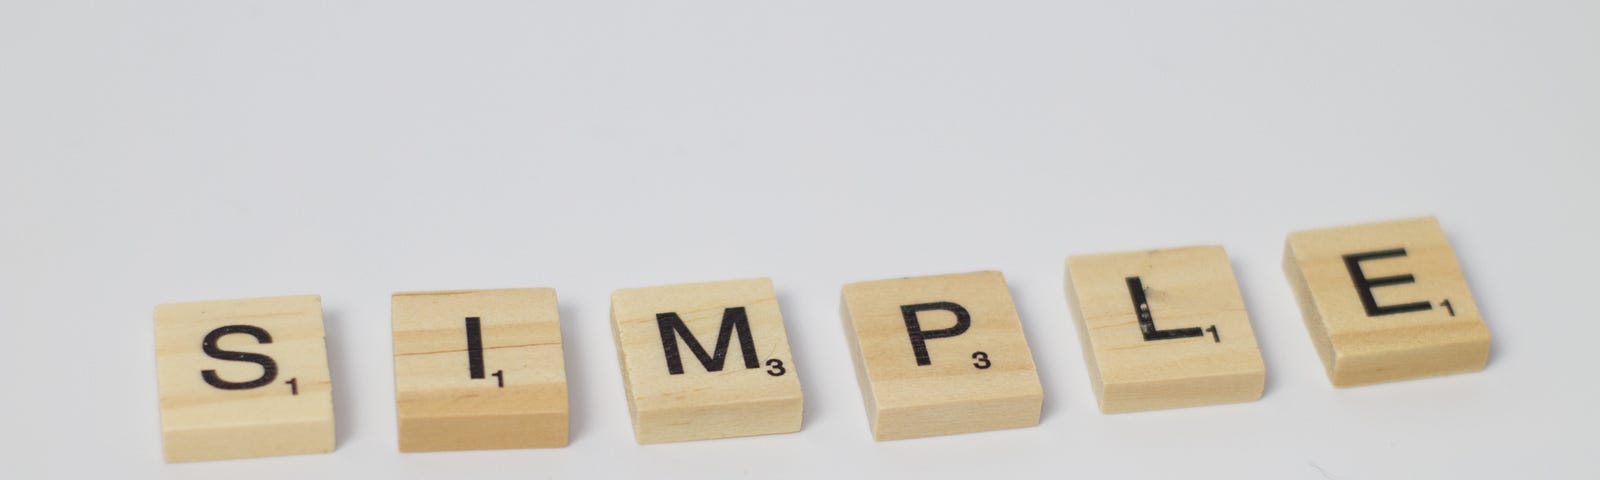 Scrabble letter blocks are lined up to spell “simple”